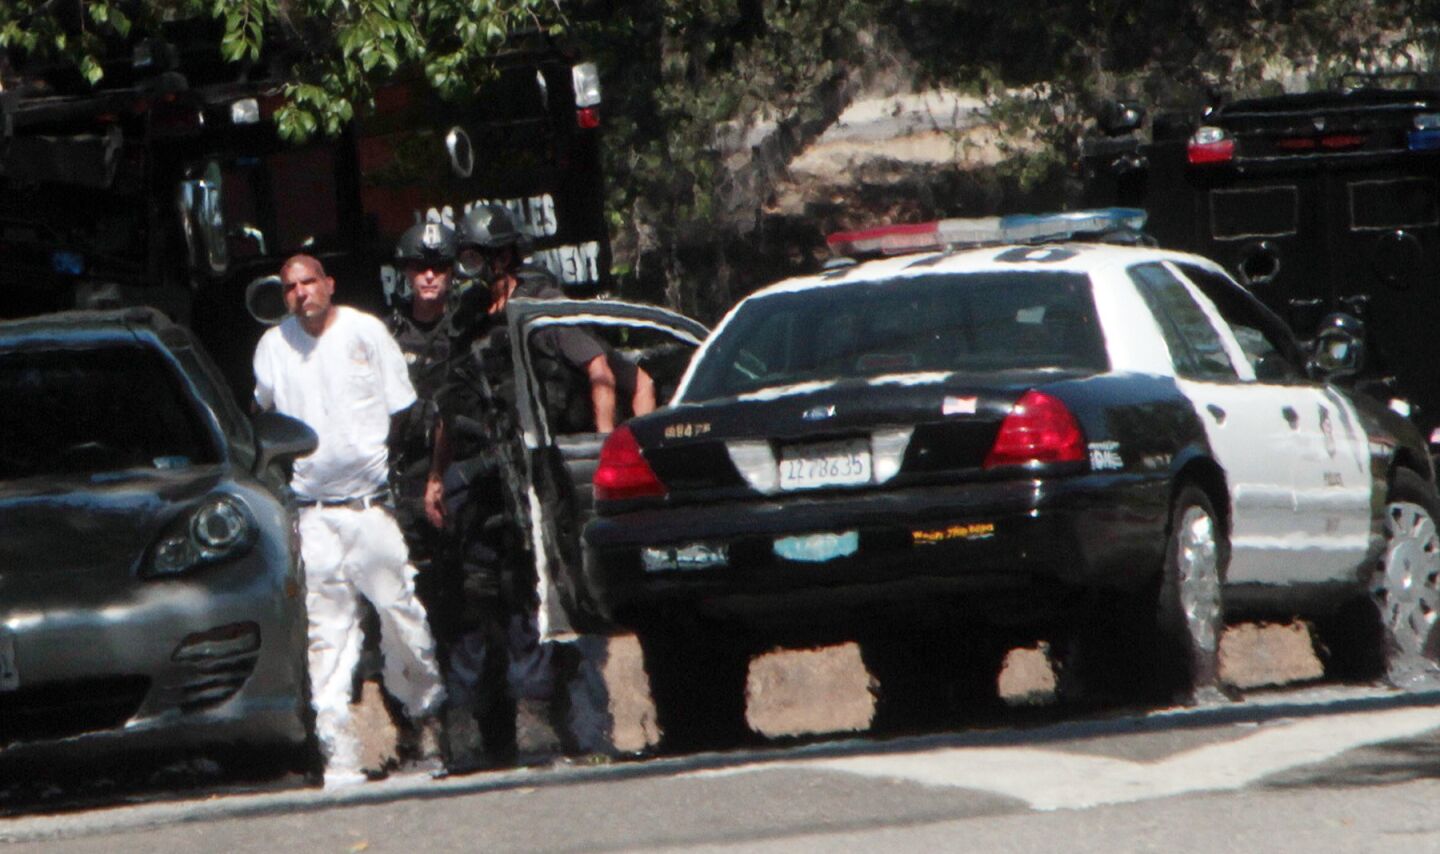 LAPD officers take a suspect into custody after a four-hour standoff in North Hollywood.